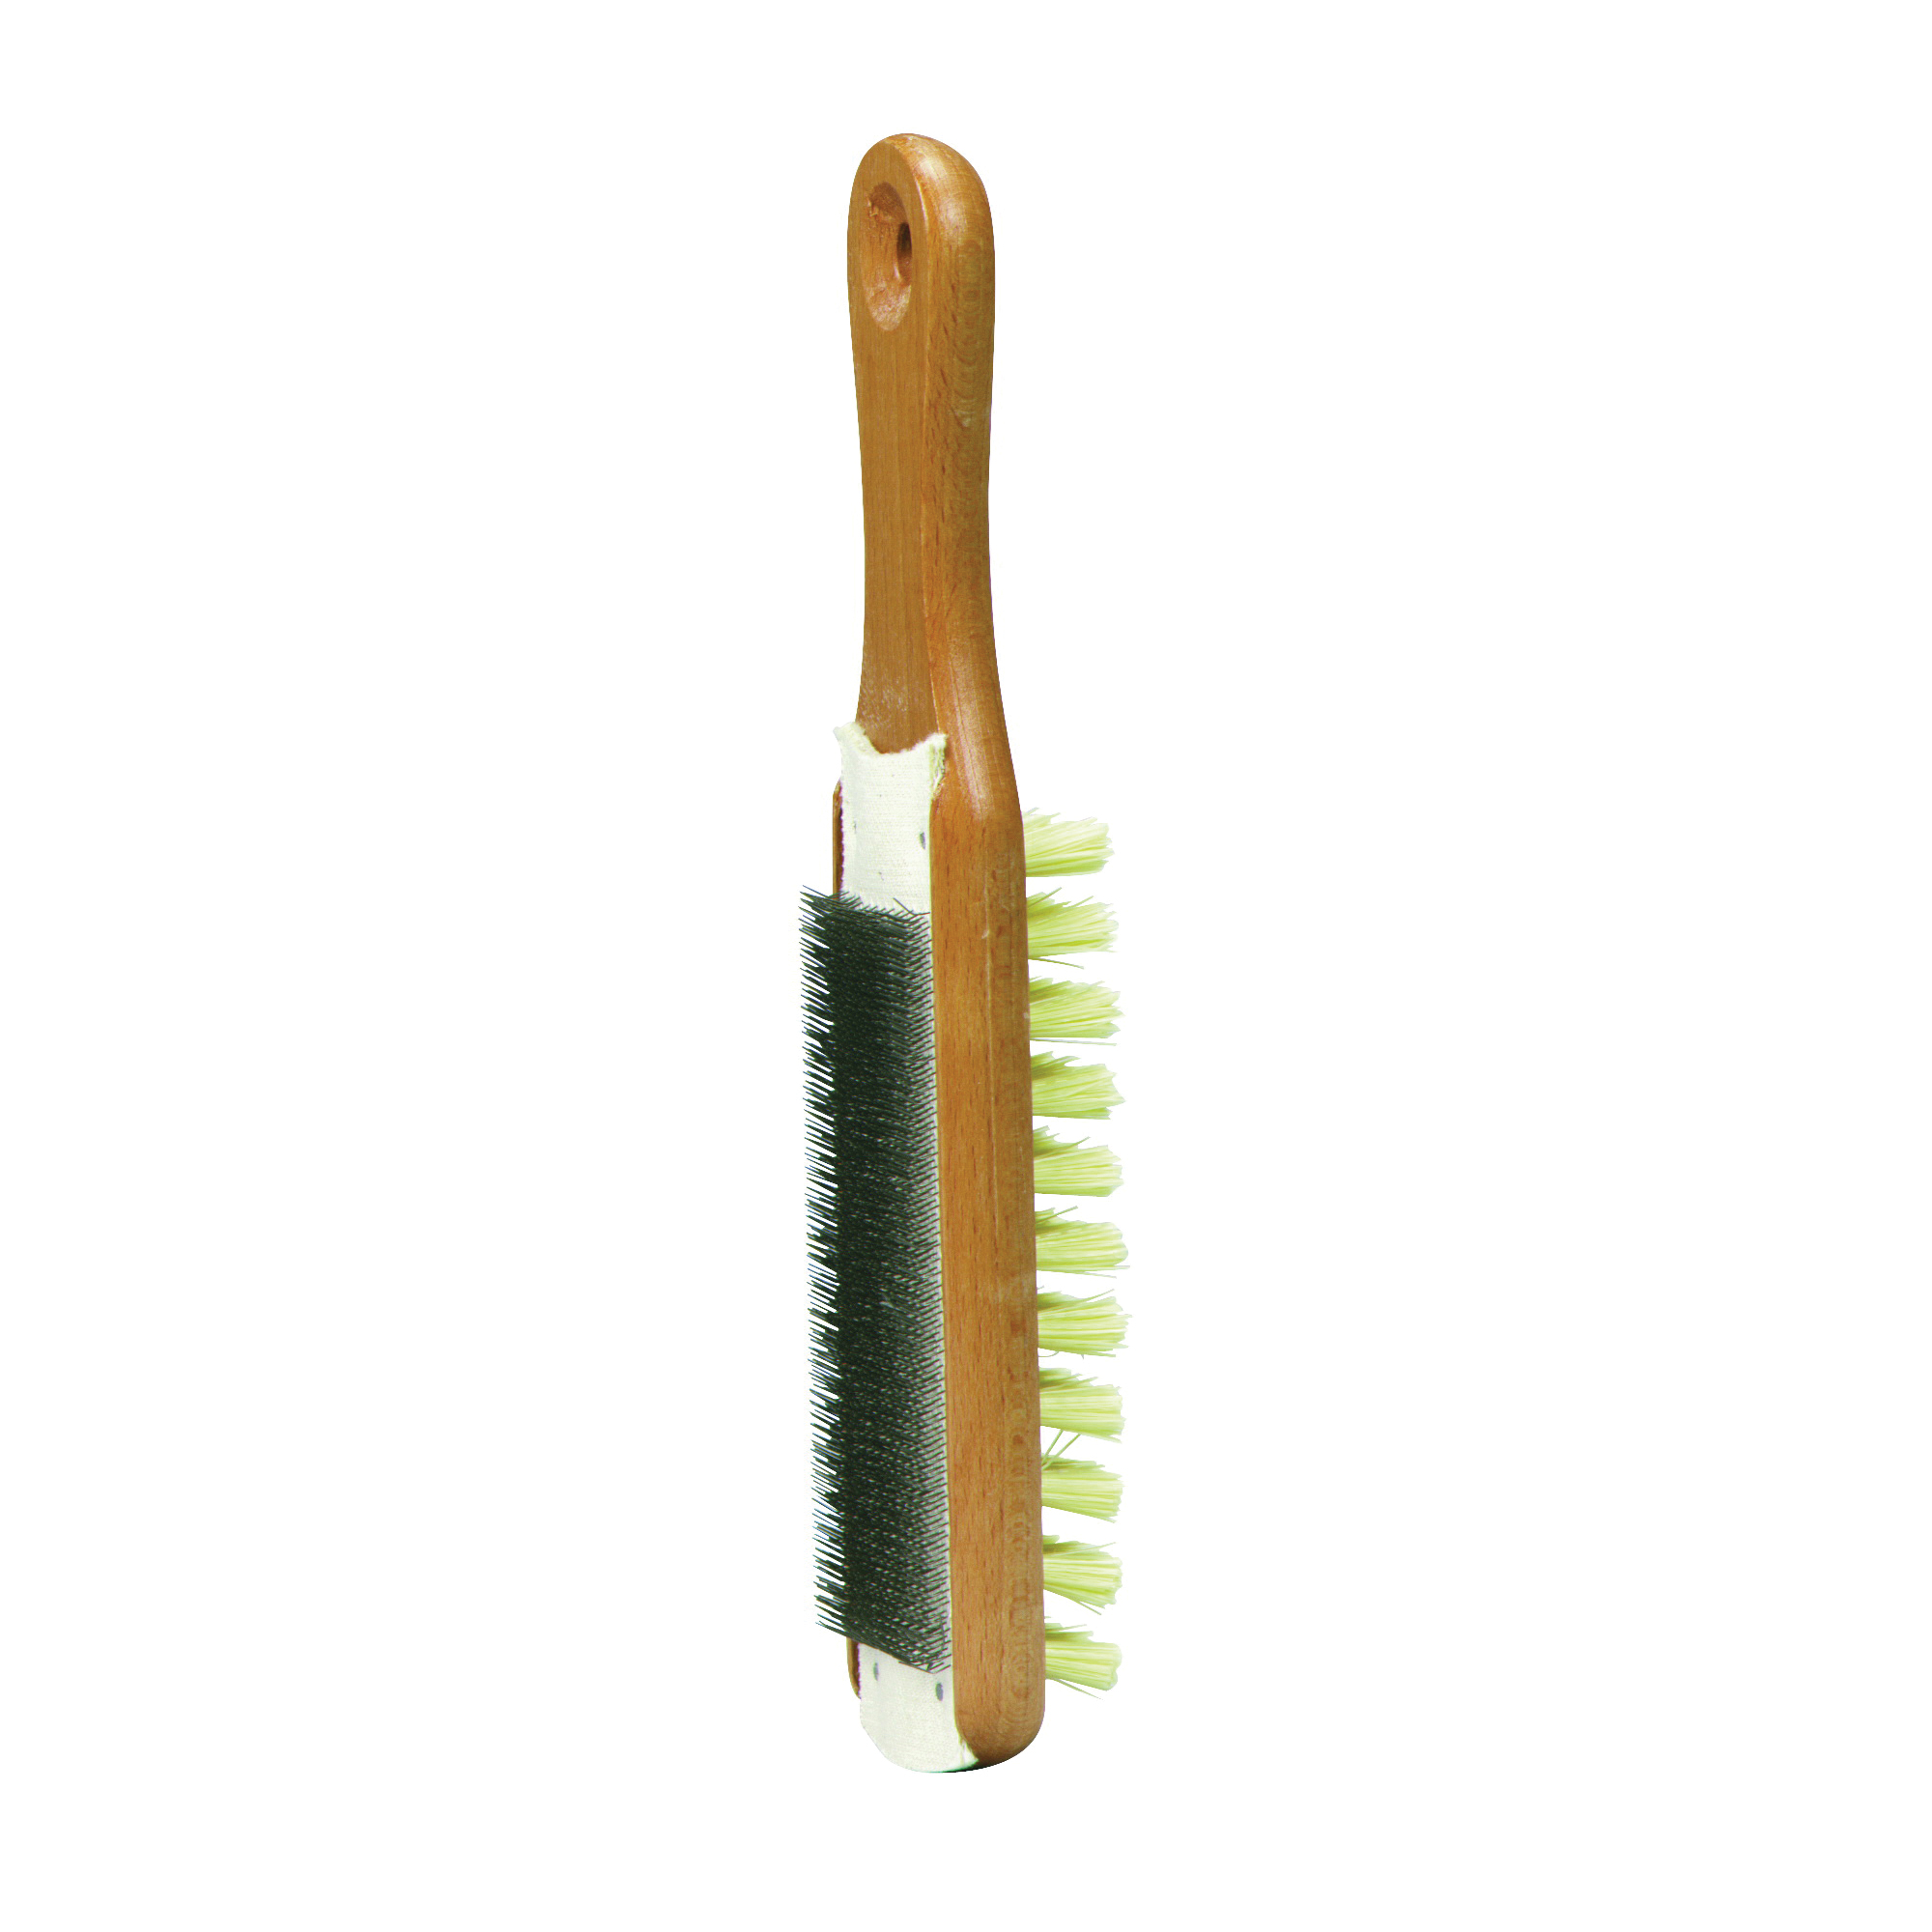 Crescent Nicholson 21467 File Card and Brush, 10 in L, Steel/Wood - 1